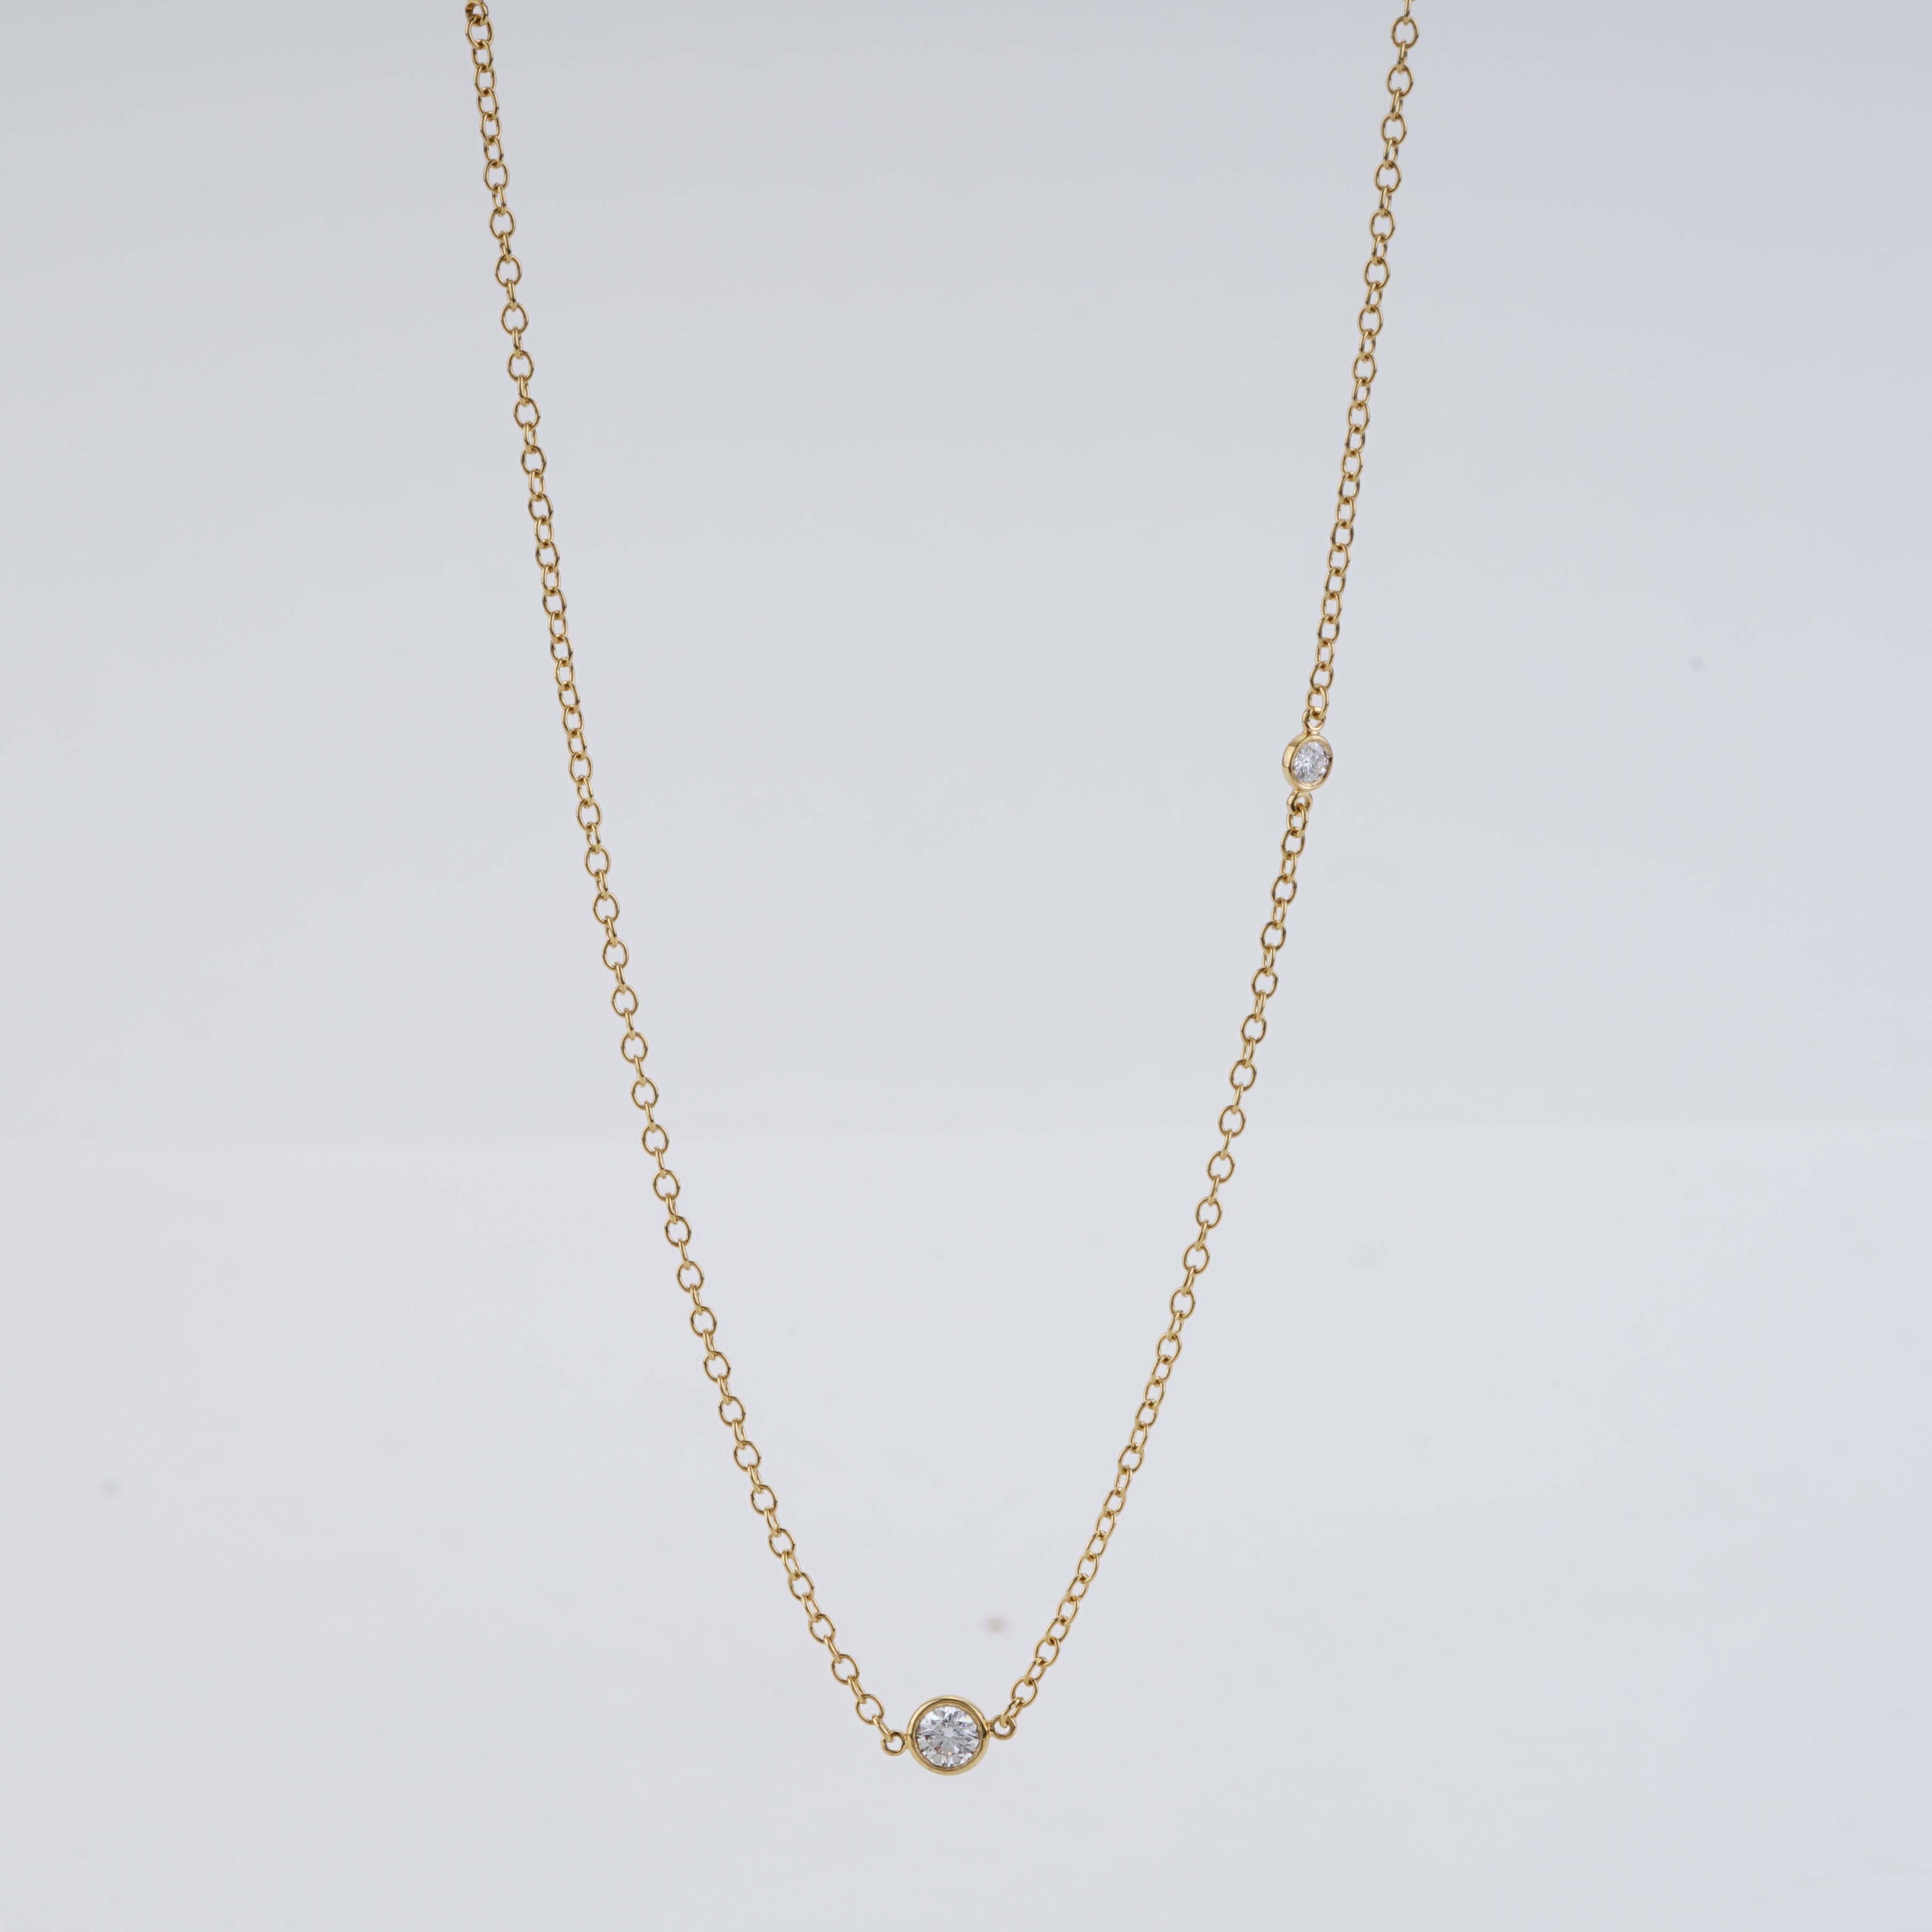 This Tiffany & Co. Elsa Peretti Sprinkle Collection Necklace is 36 inches in length and weighs 3.90 DWT (approx. 6.07 grams). It contains 12 round G and VS clarity diamonds weighing a total of 1.21 carats. Style # 43605878